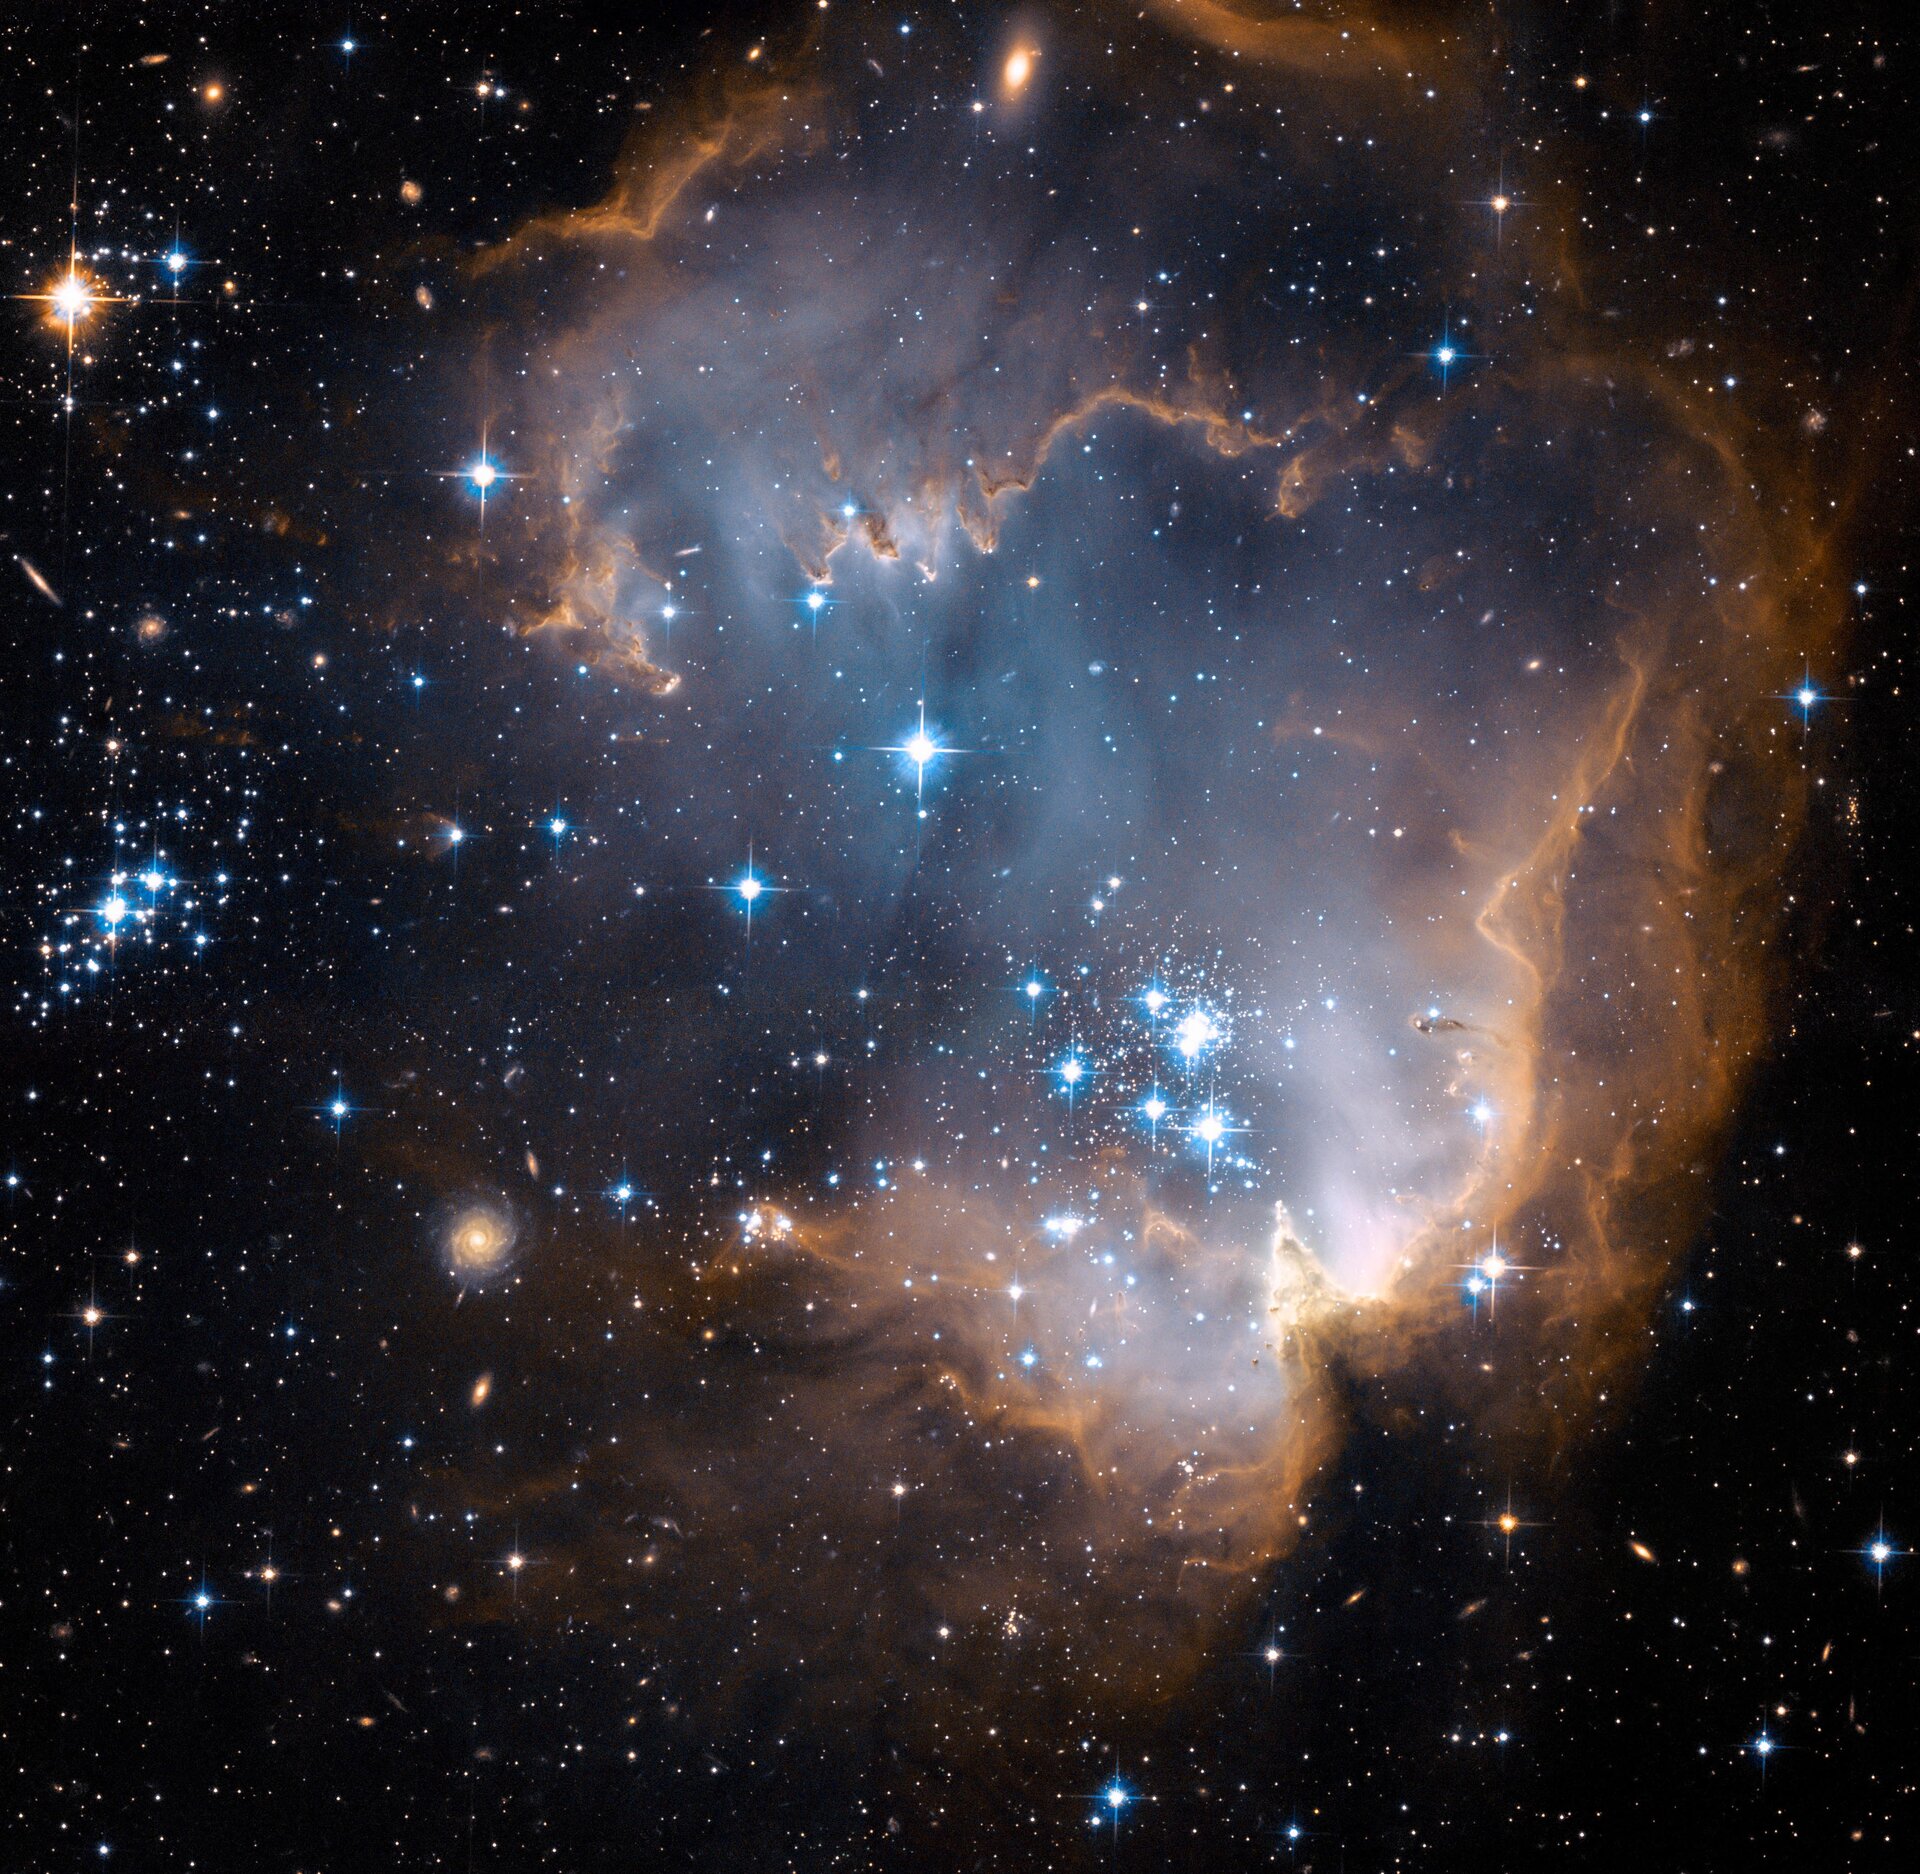 Hubble's view of N90 star-forming region